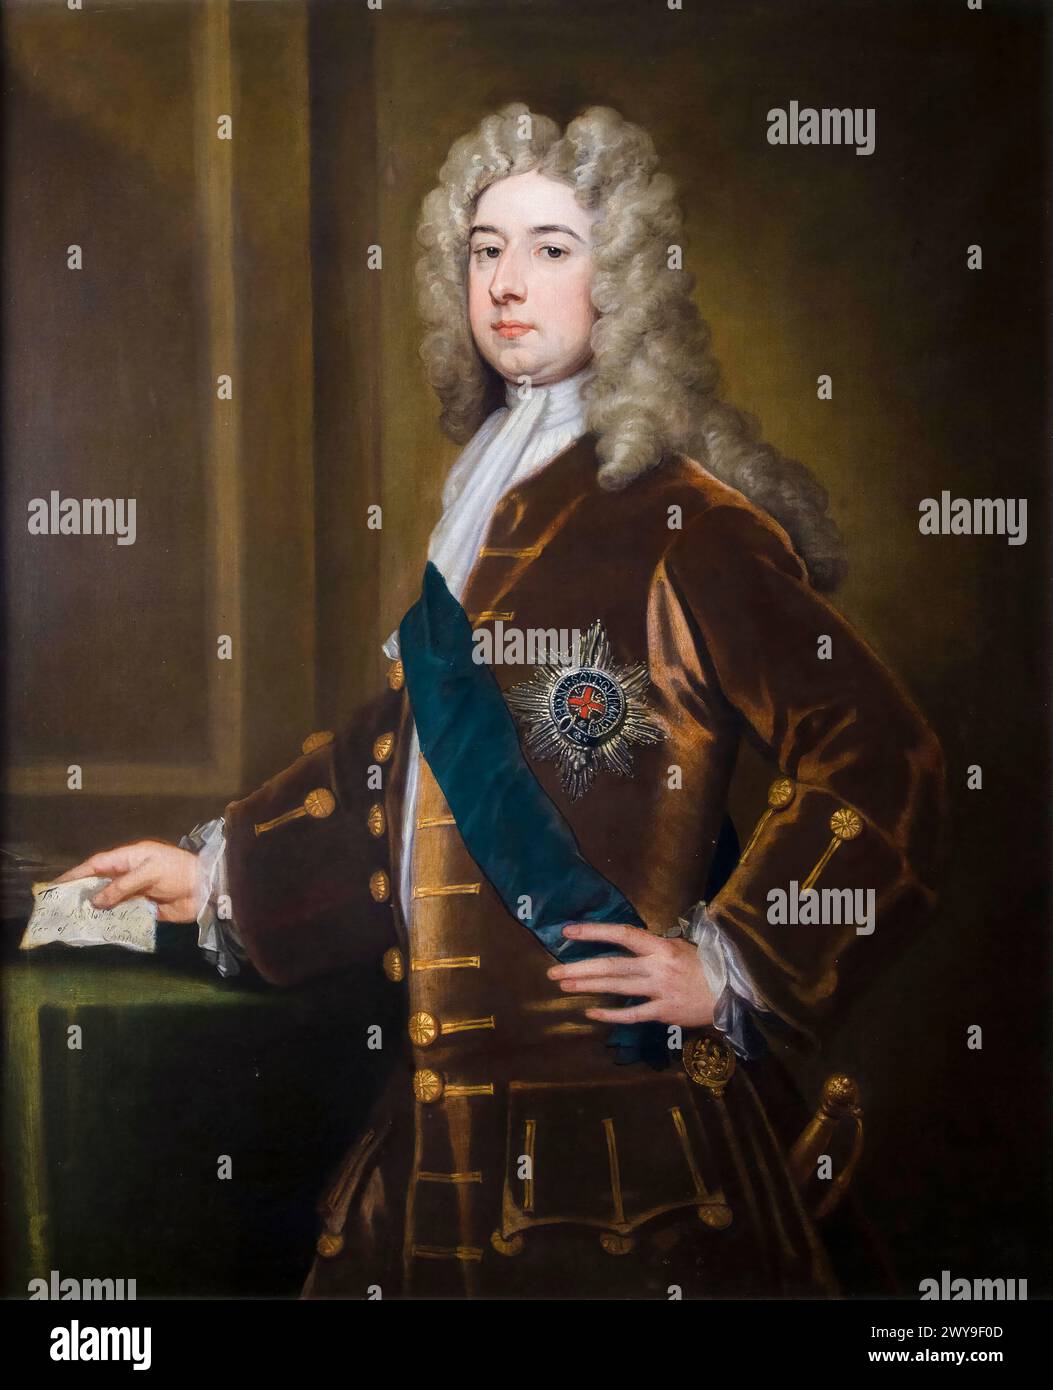 Spencer Compton, 1st Earl of Wilmington (1673-1743), Whig politician and Prime Minister of Great Britain 1742-1743, portrait painting in oil on canvas by Sir Godfrey Kneller (attributed), circa 1715 Stock Photo